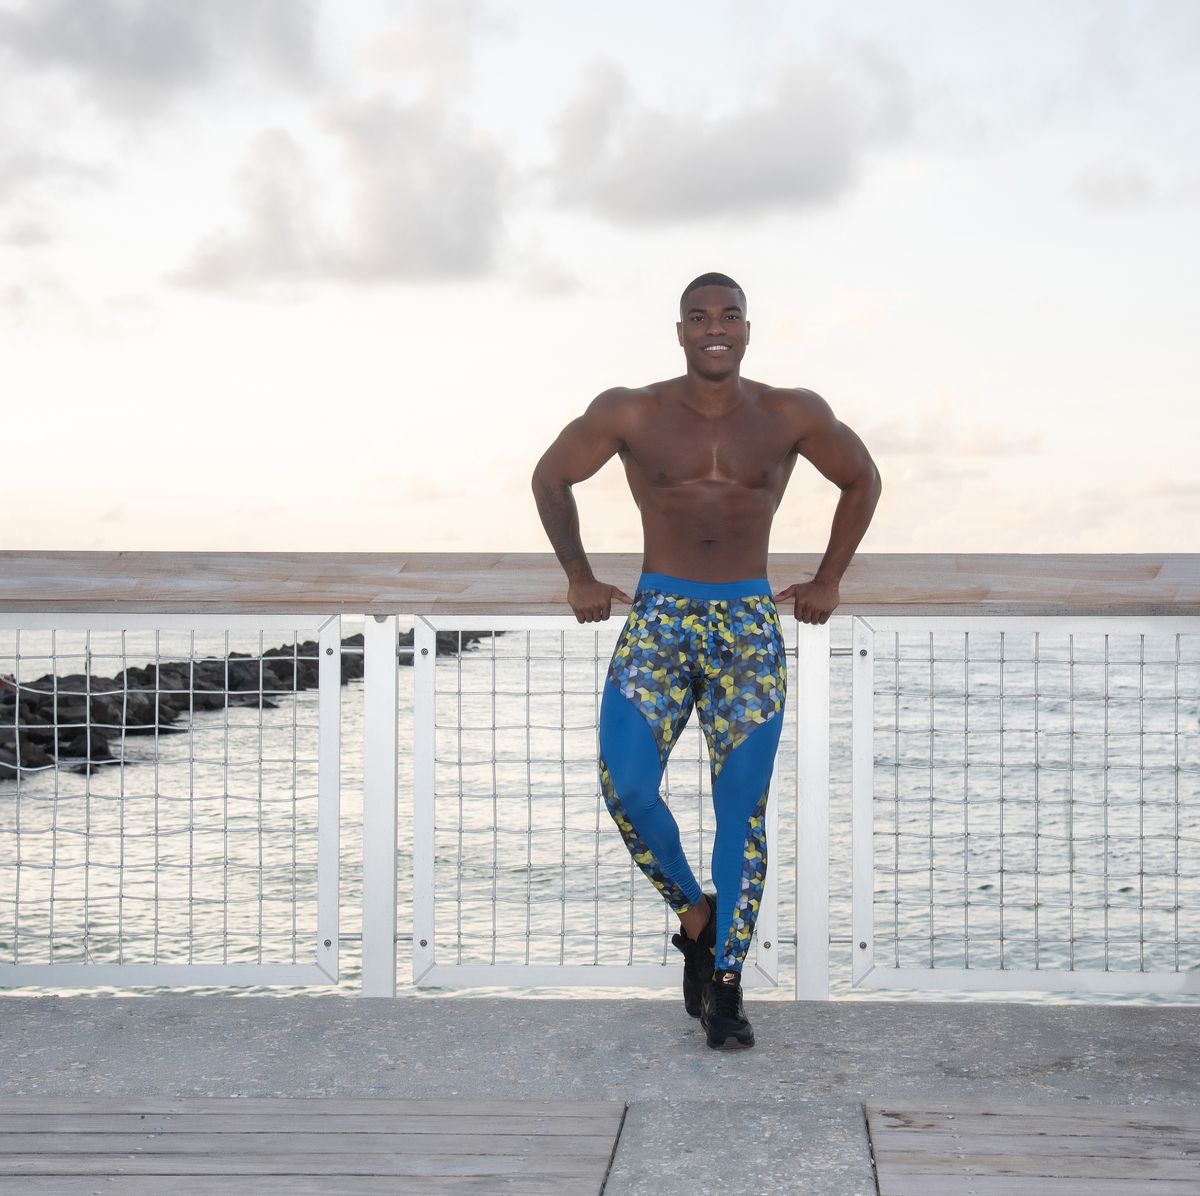 How Men Can Wear Compression Leggings and Tights With Less Bulge